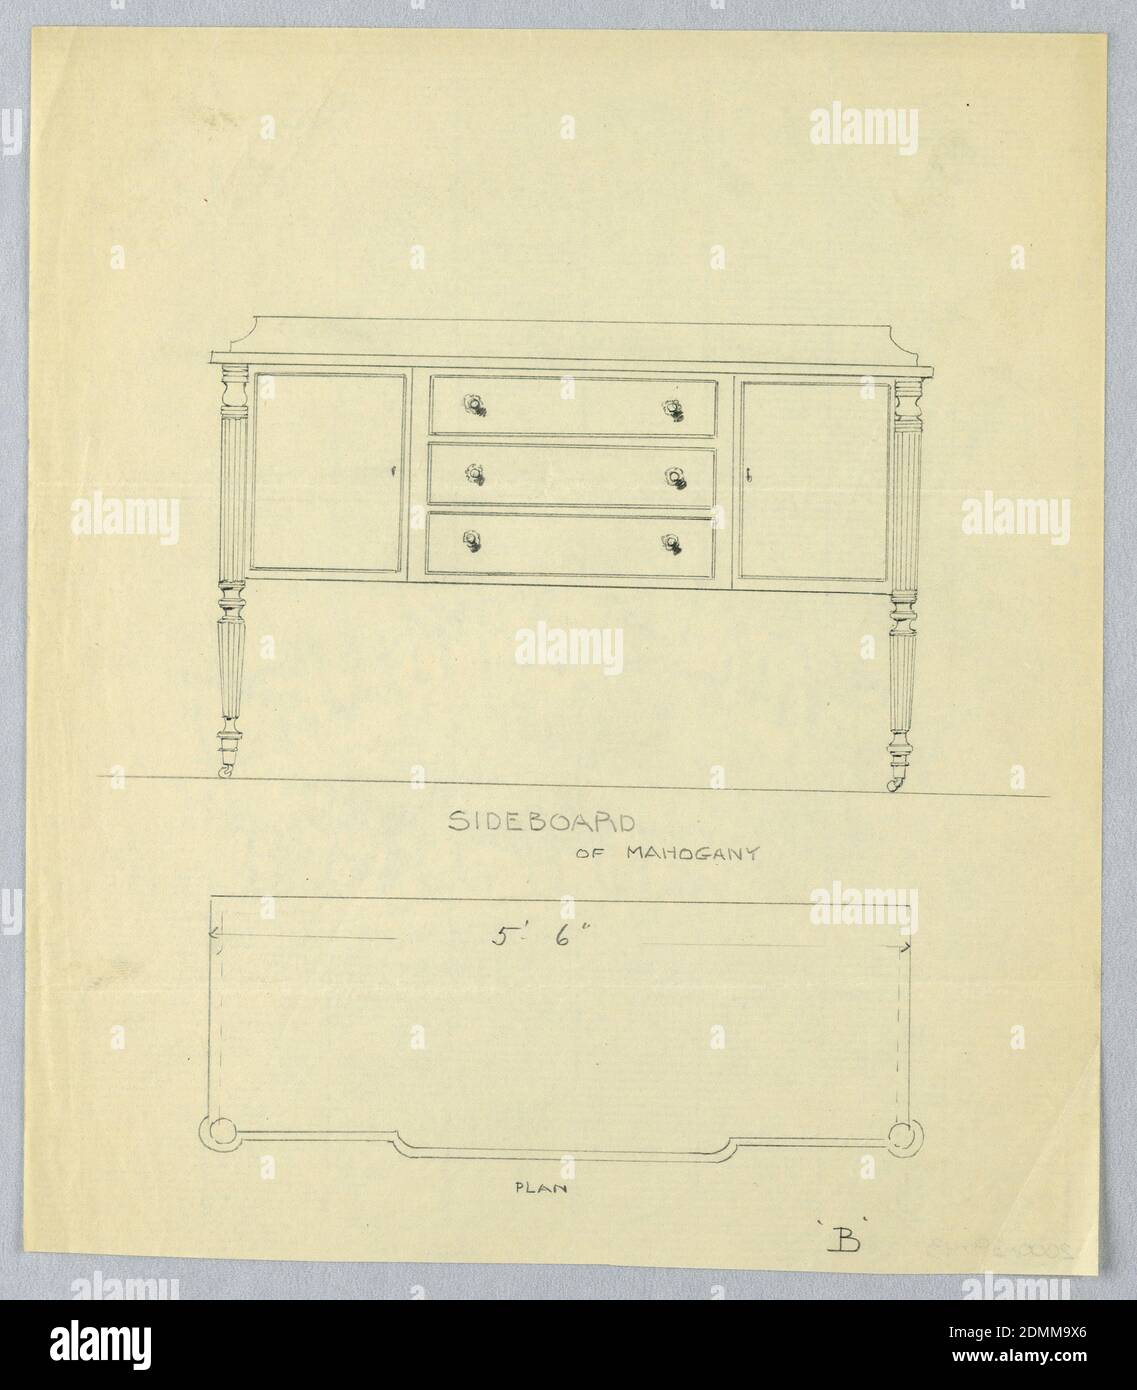 Design in Plan and Elevation for Mahogany Sideboard on Casters, A.N. Davenport Co., Graphite on thin cream paper, Elevation view: rectangular sideboard with 4 turned and fluted straight tapering legs on casters; tri-partite front has 3 drawers flanked by 2 doors; low backsplash., Plan view: slightly protruding front section with rounded front corners., 1900–05, furniture, Drawing Stock Photo